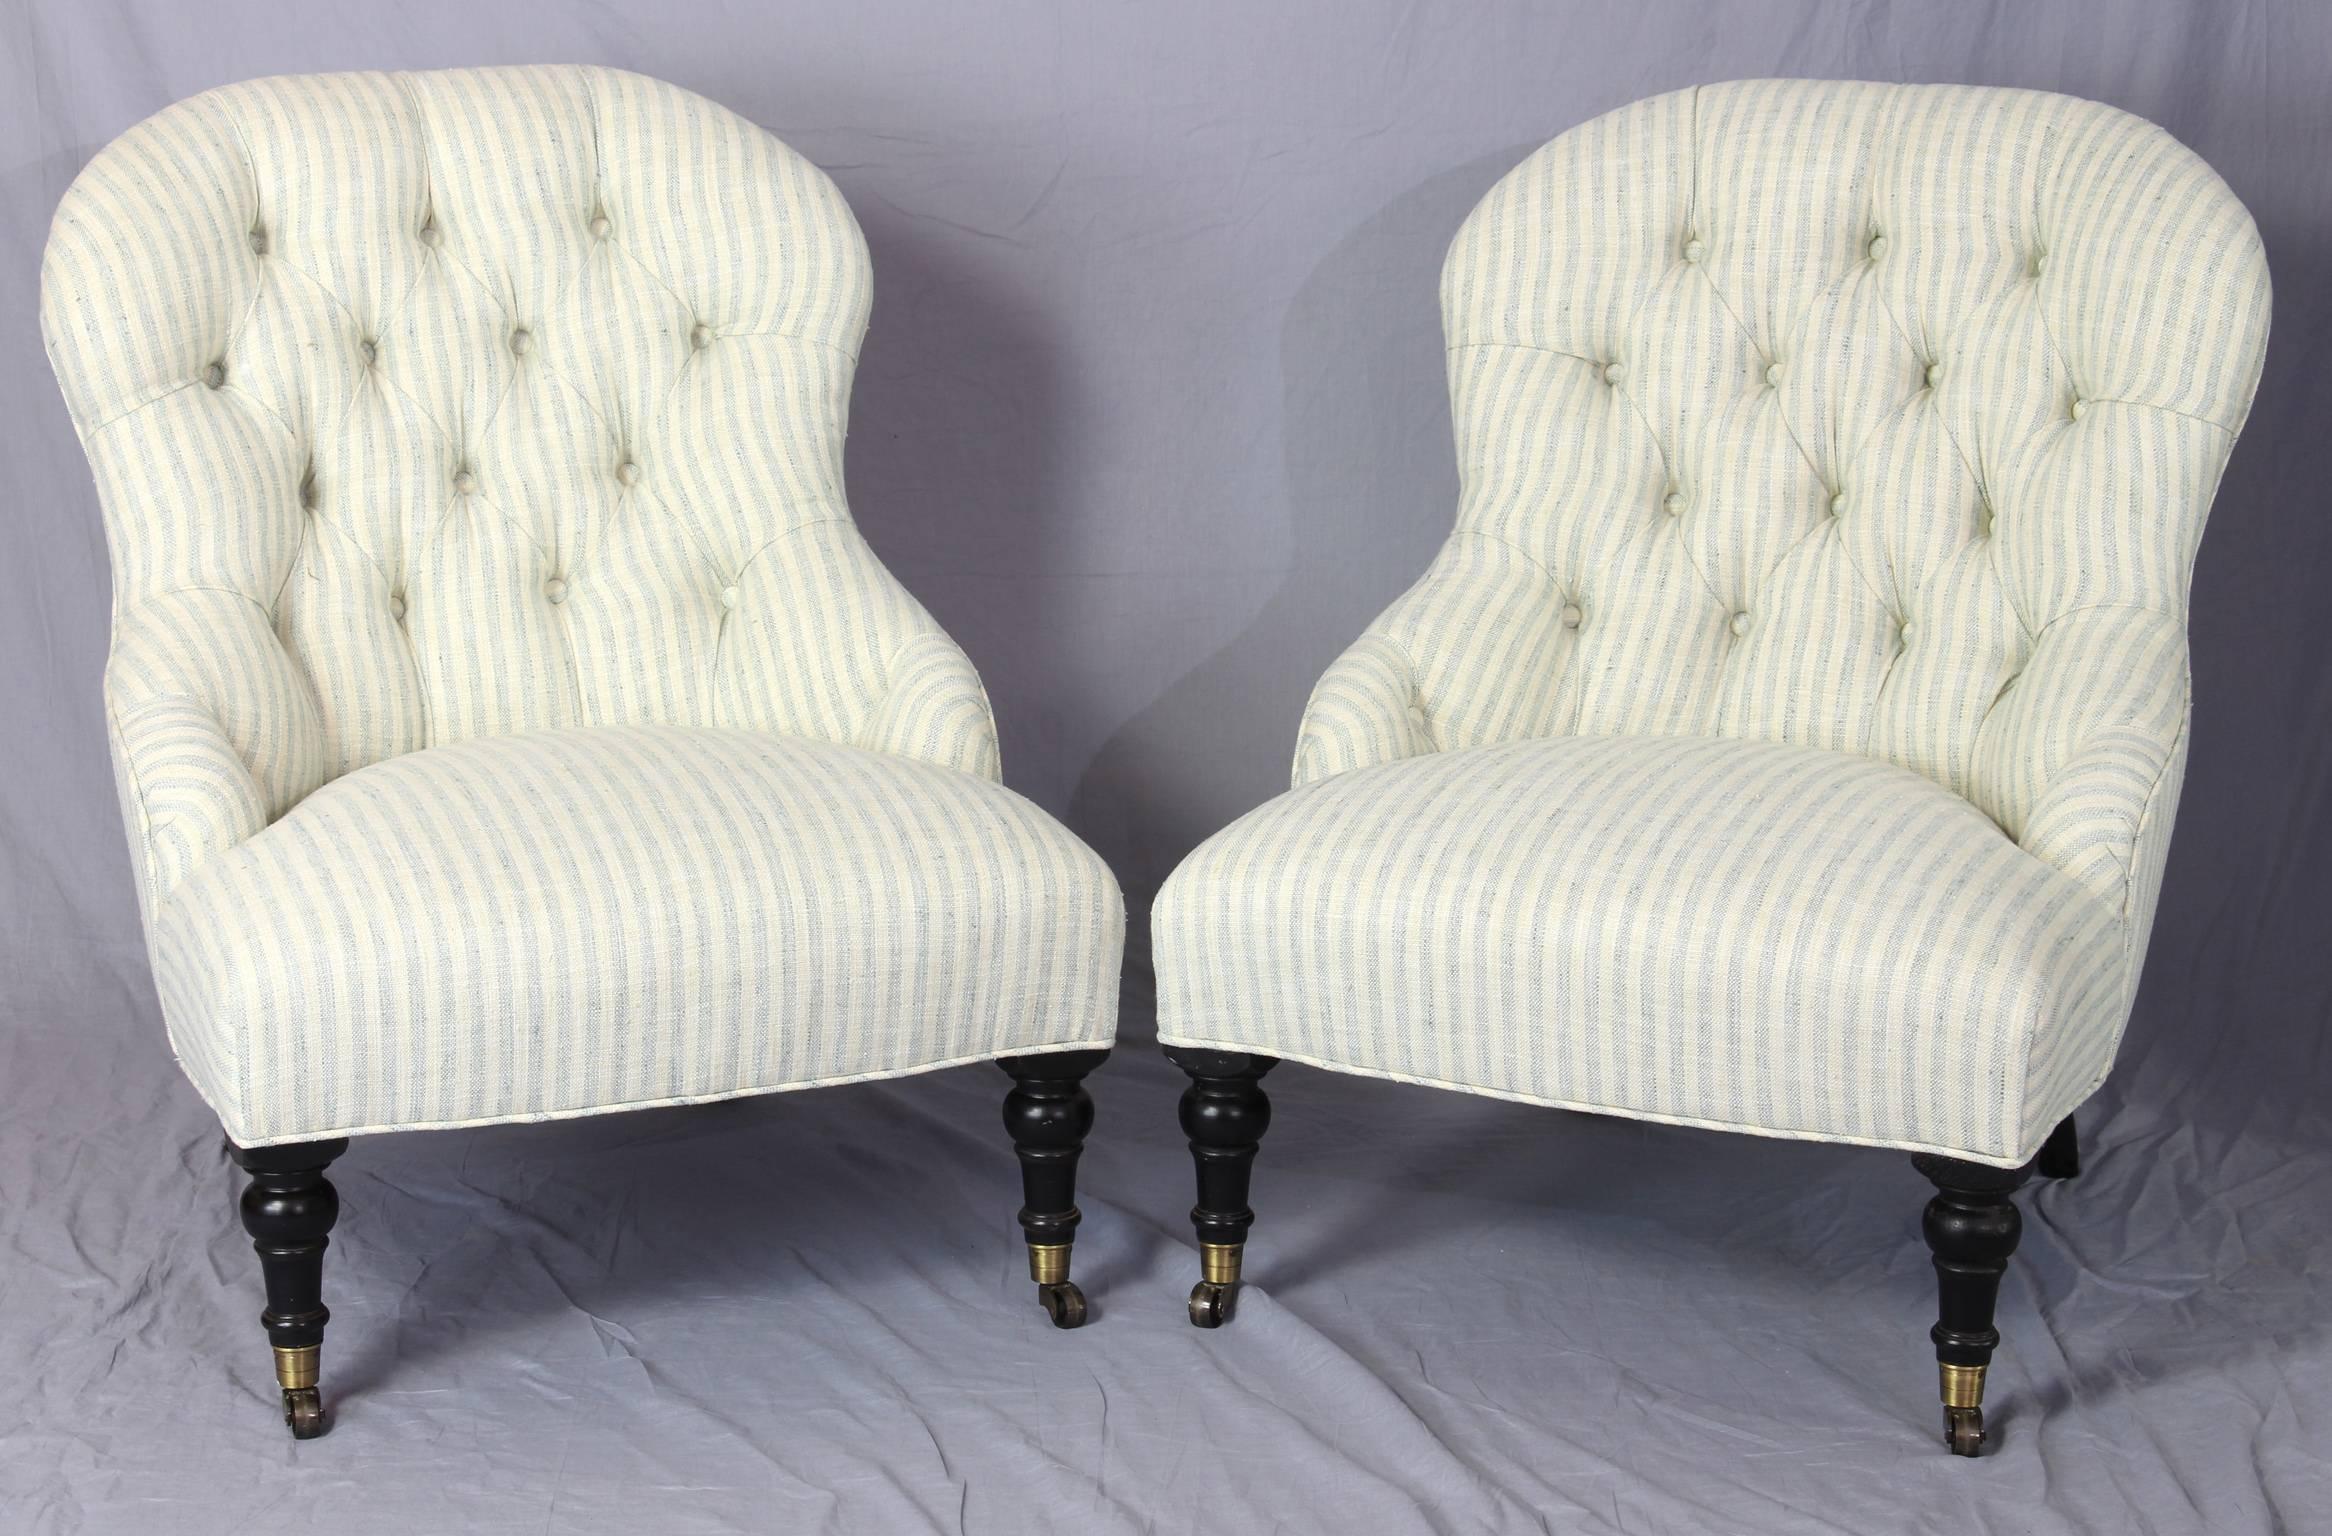 A pair of Edwardian style buttoned back slipper chairs on turned front legs with brass casters newly upholstered in a cream and blue striped linen/cotton fabric.